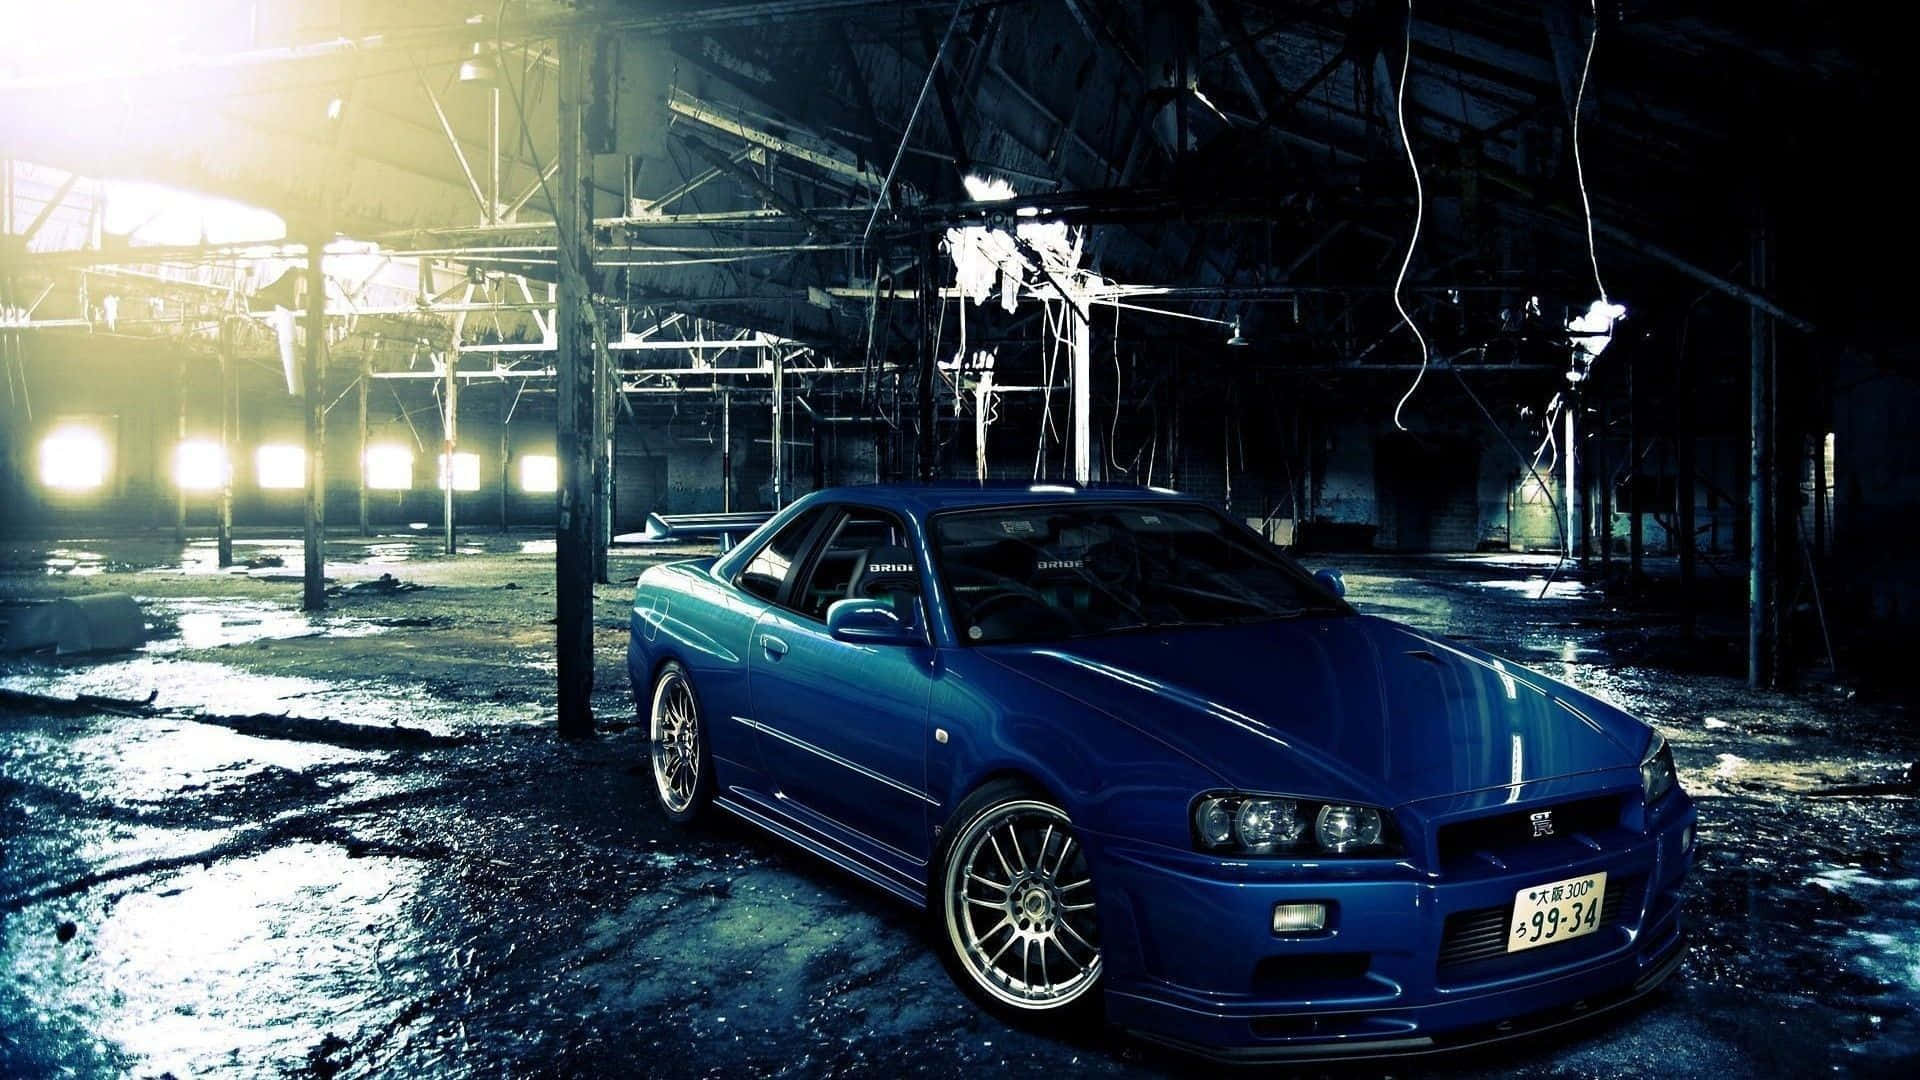 Dive into the Coolness with the Nissan Skyline Wallpaper